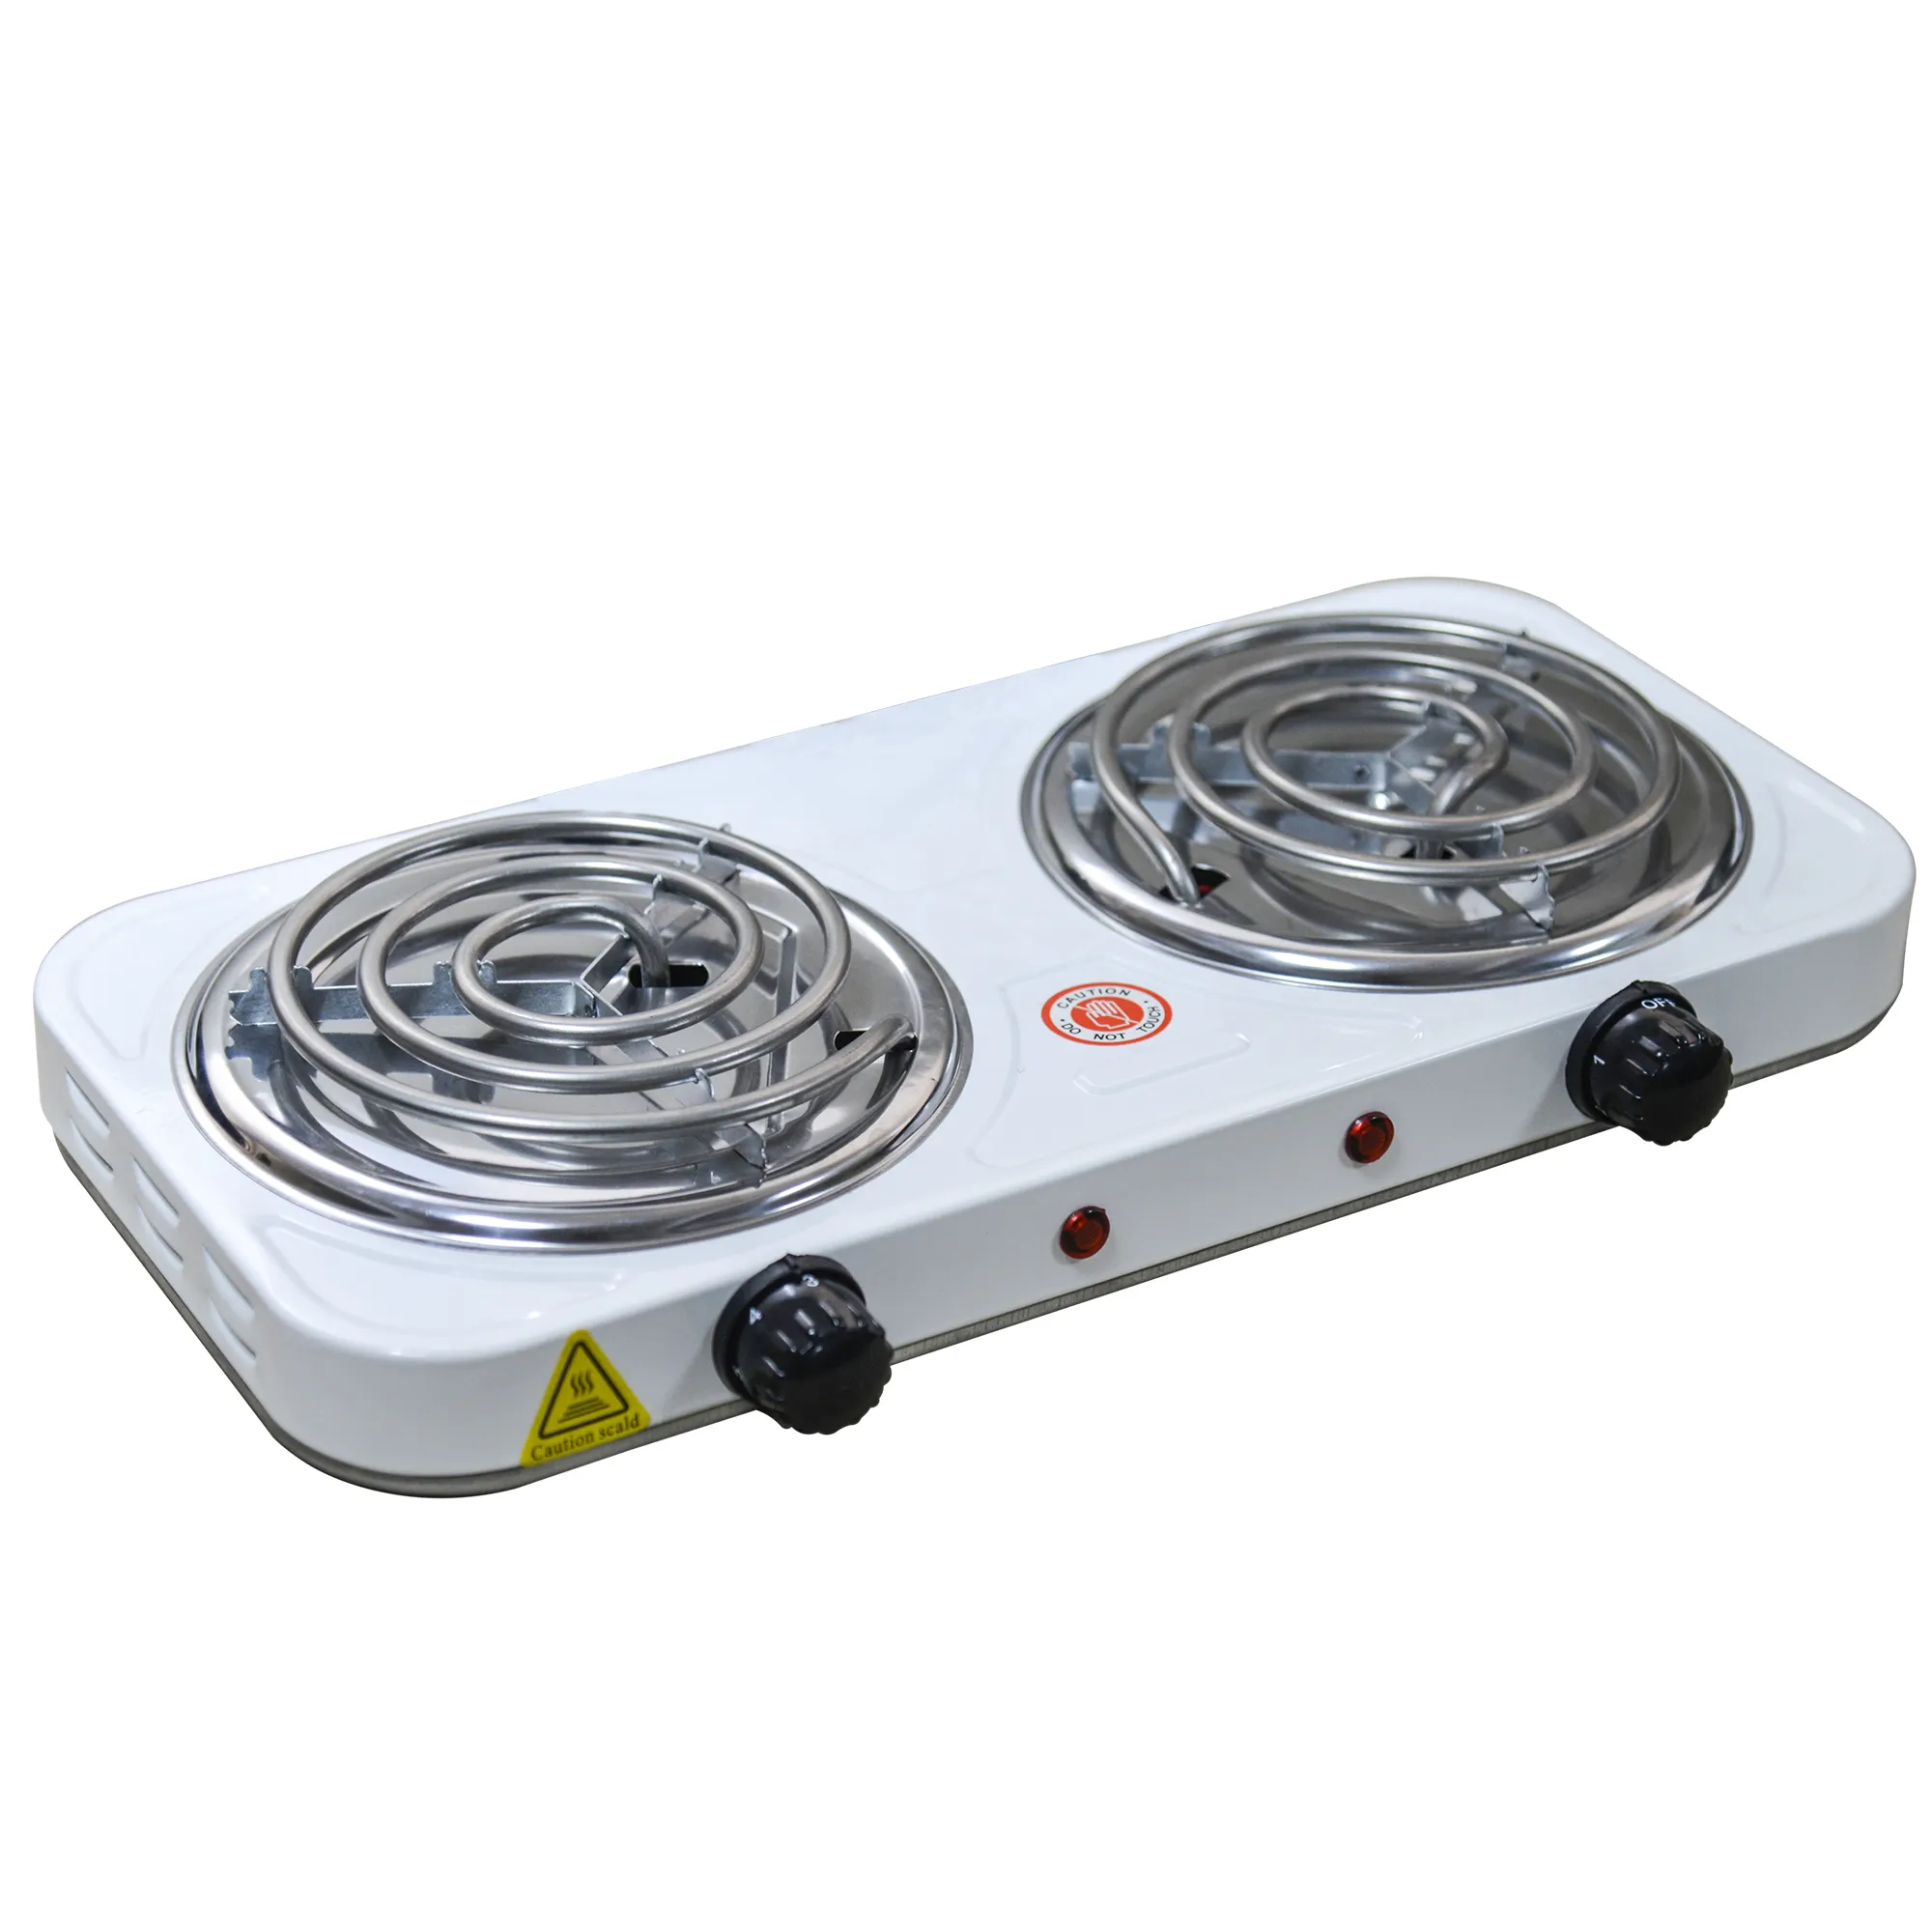 Double coil hot plate Temperature Control Multi-Function Electric stove